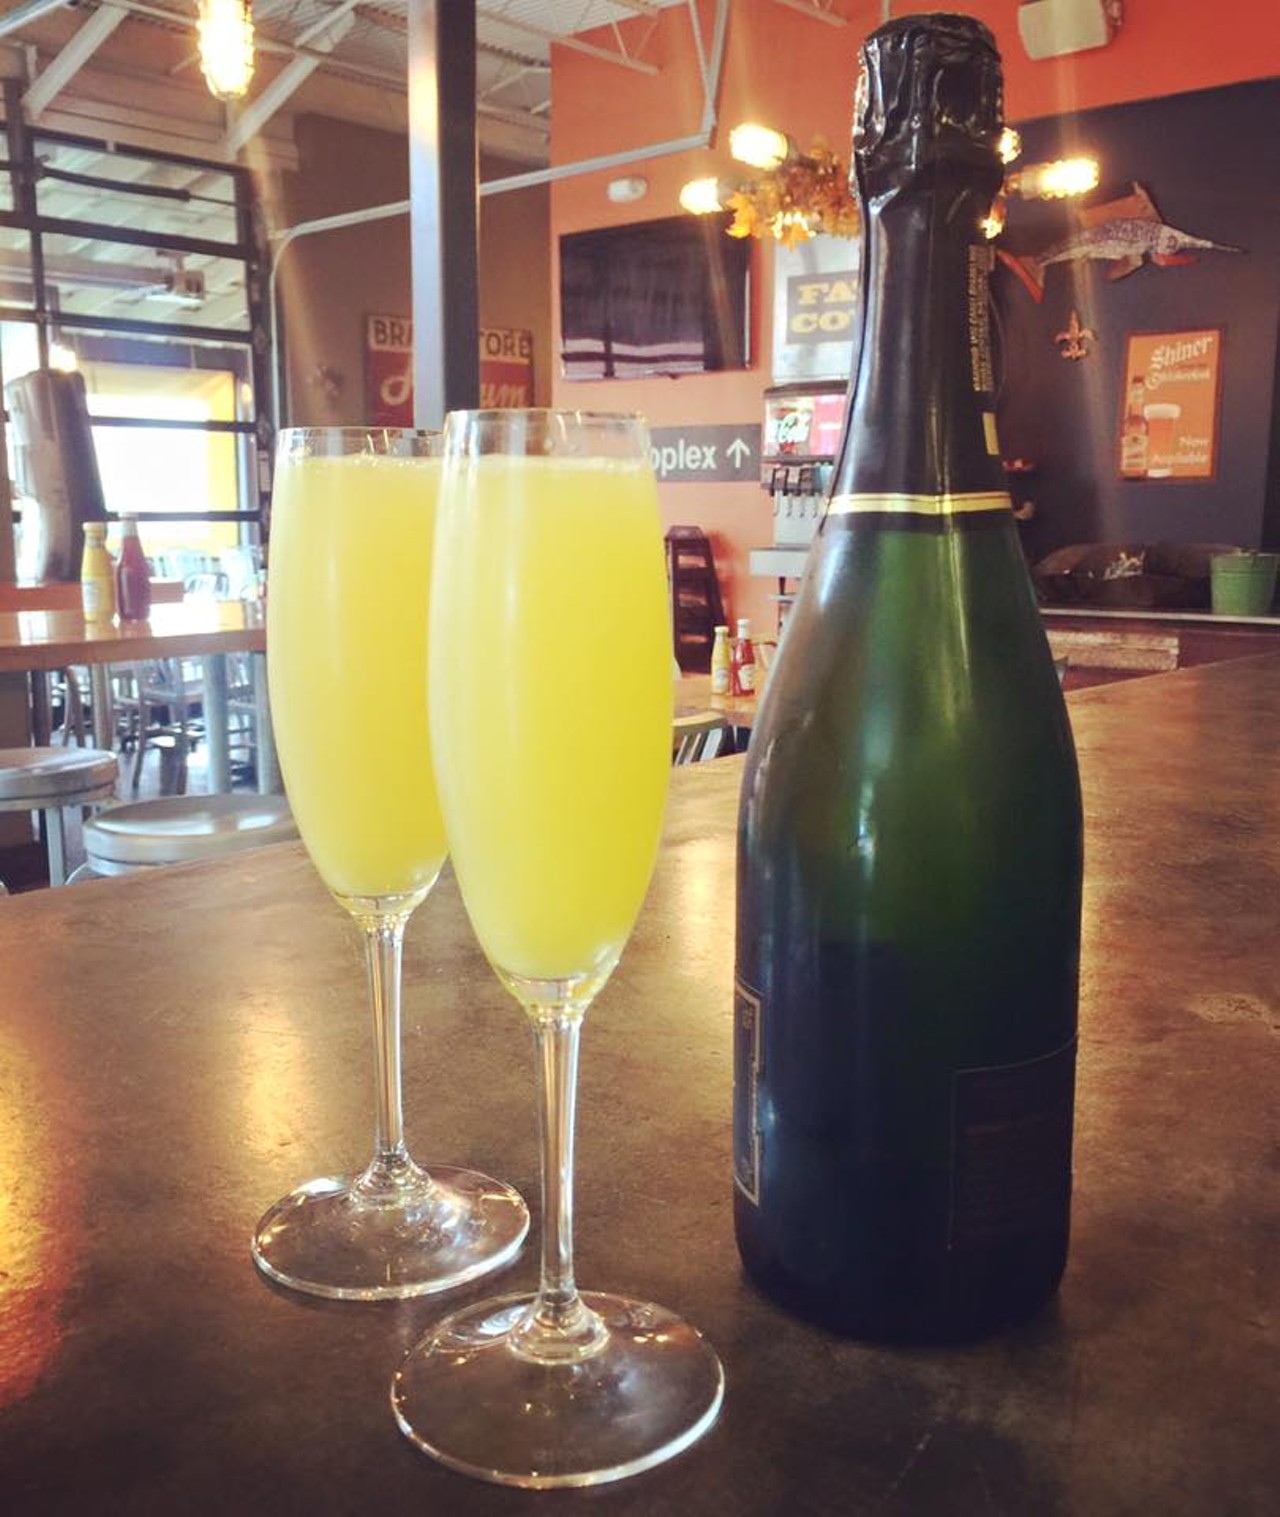 14 places to dine in Detroit if you love bottomless mimosas